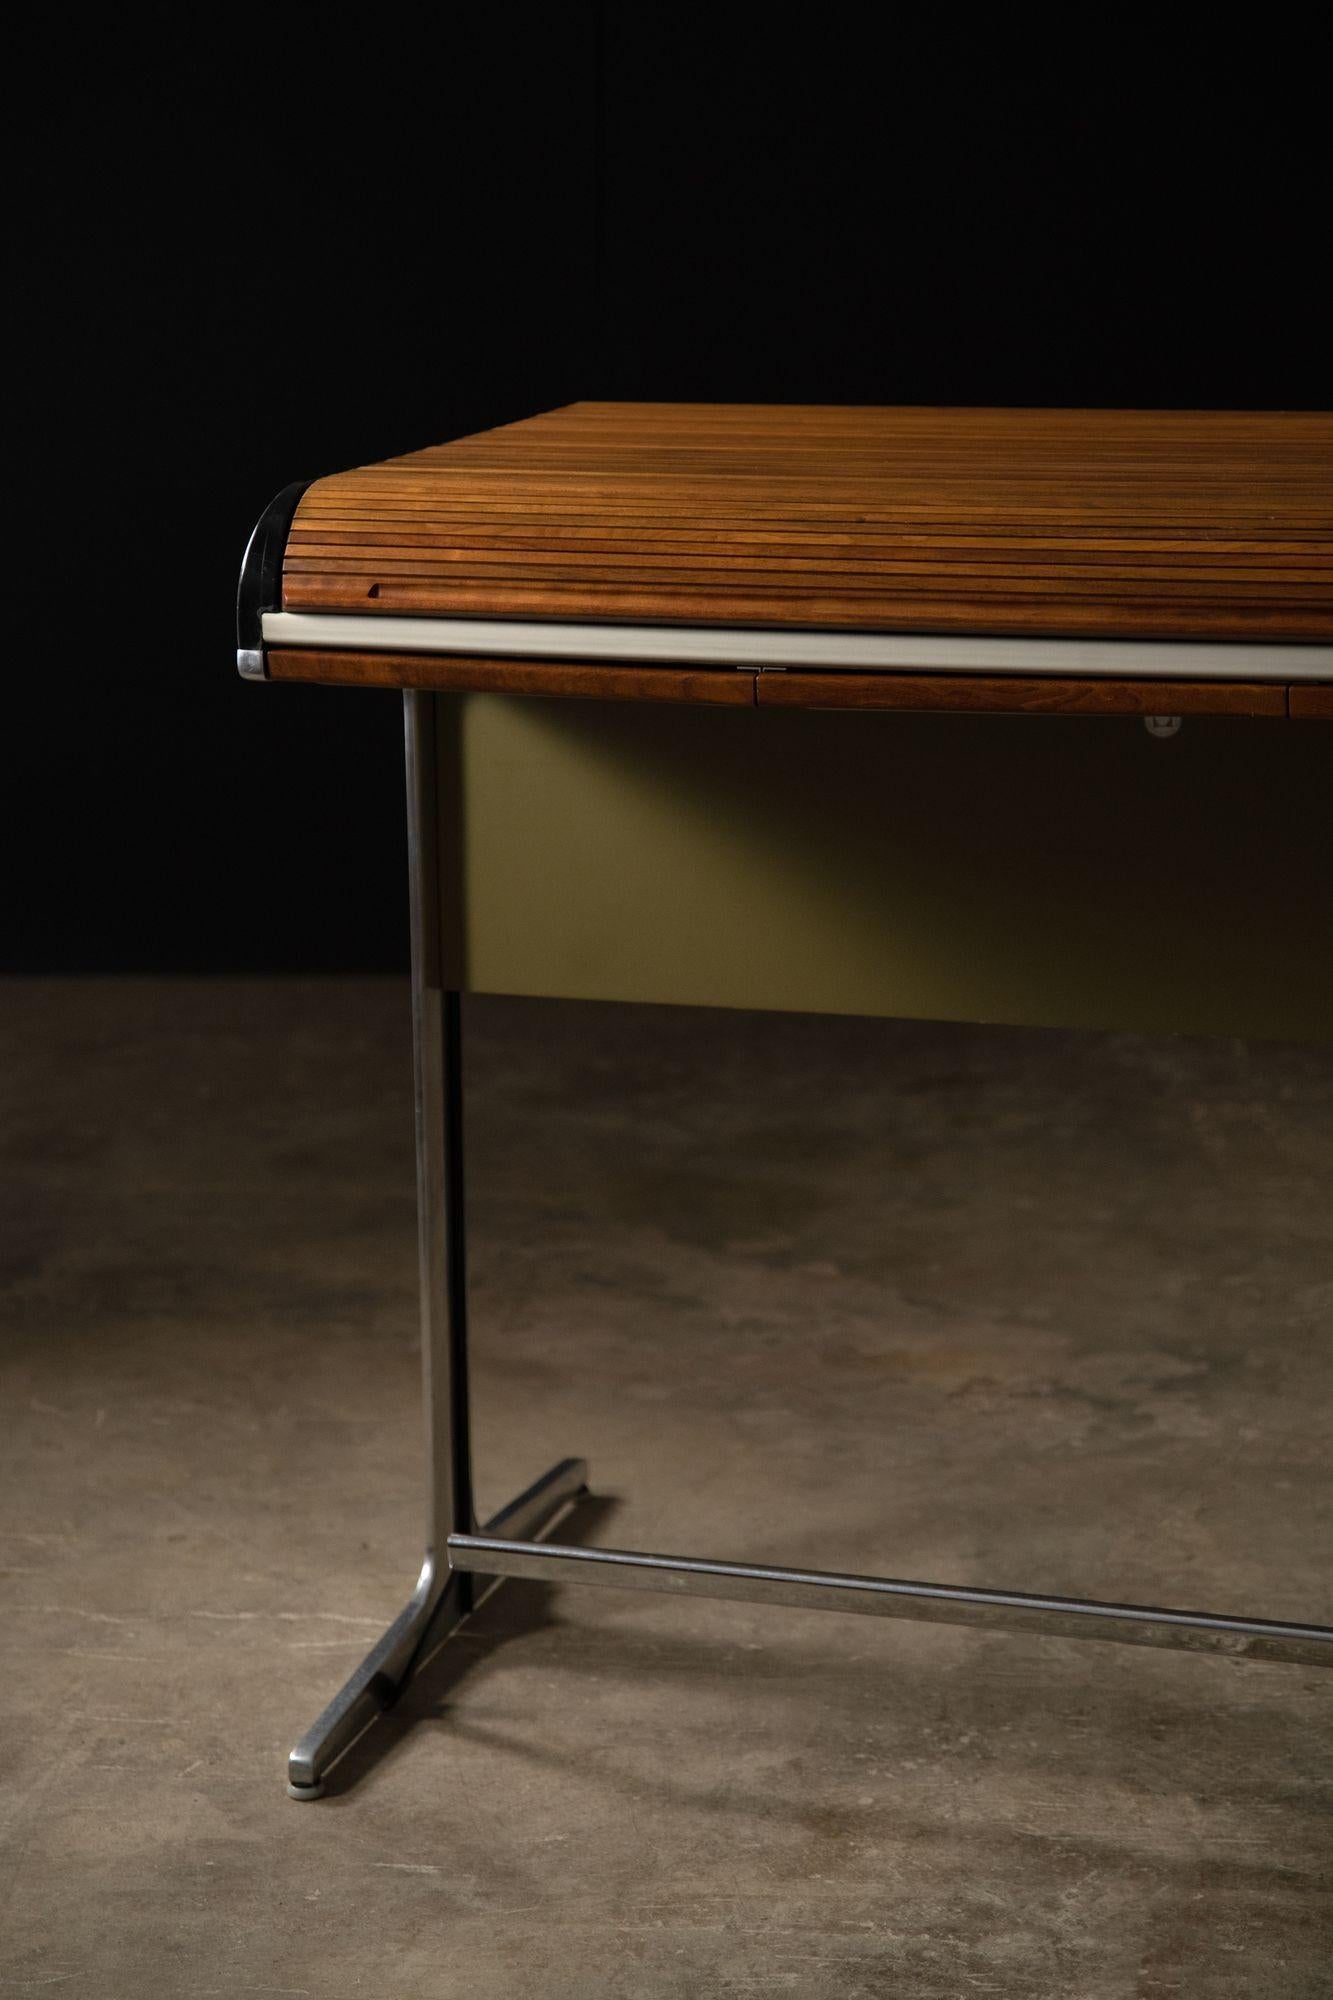 Striking black and walnut roll-top architect's desk with three drawers and hidden file storage.
Produced in 1964 by the Herman Miller company for the Action Office Series.
 
Retains the George Nelson for Herman Miller Medallion label.